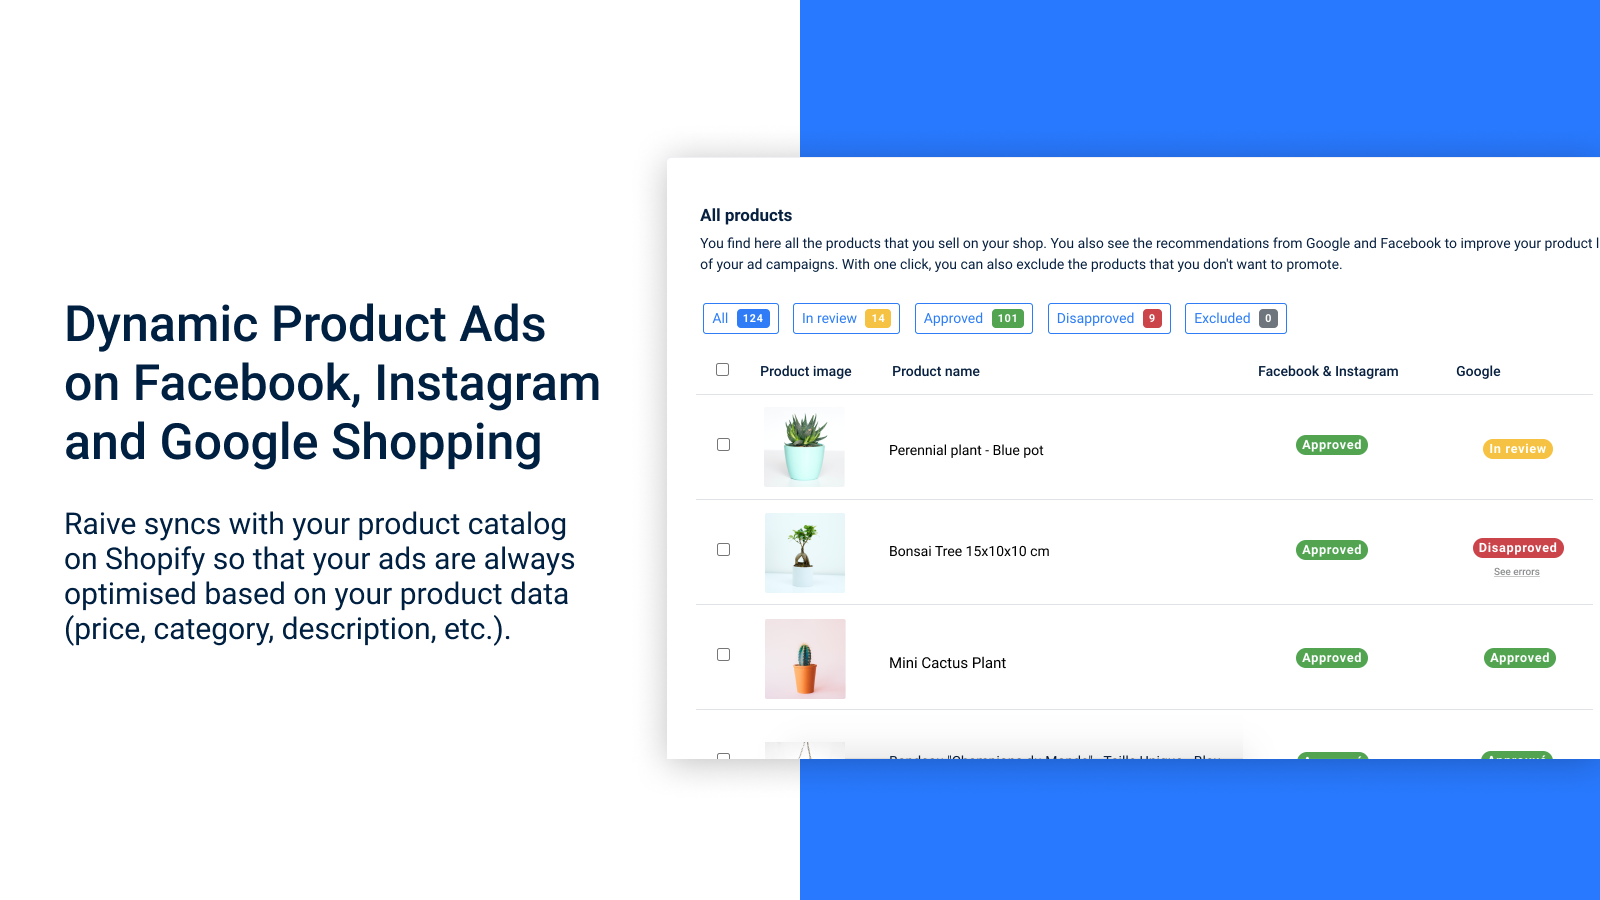 Dynamic Product Ads on Facebook, Instagram and Google Shopping